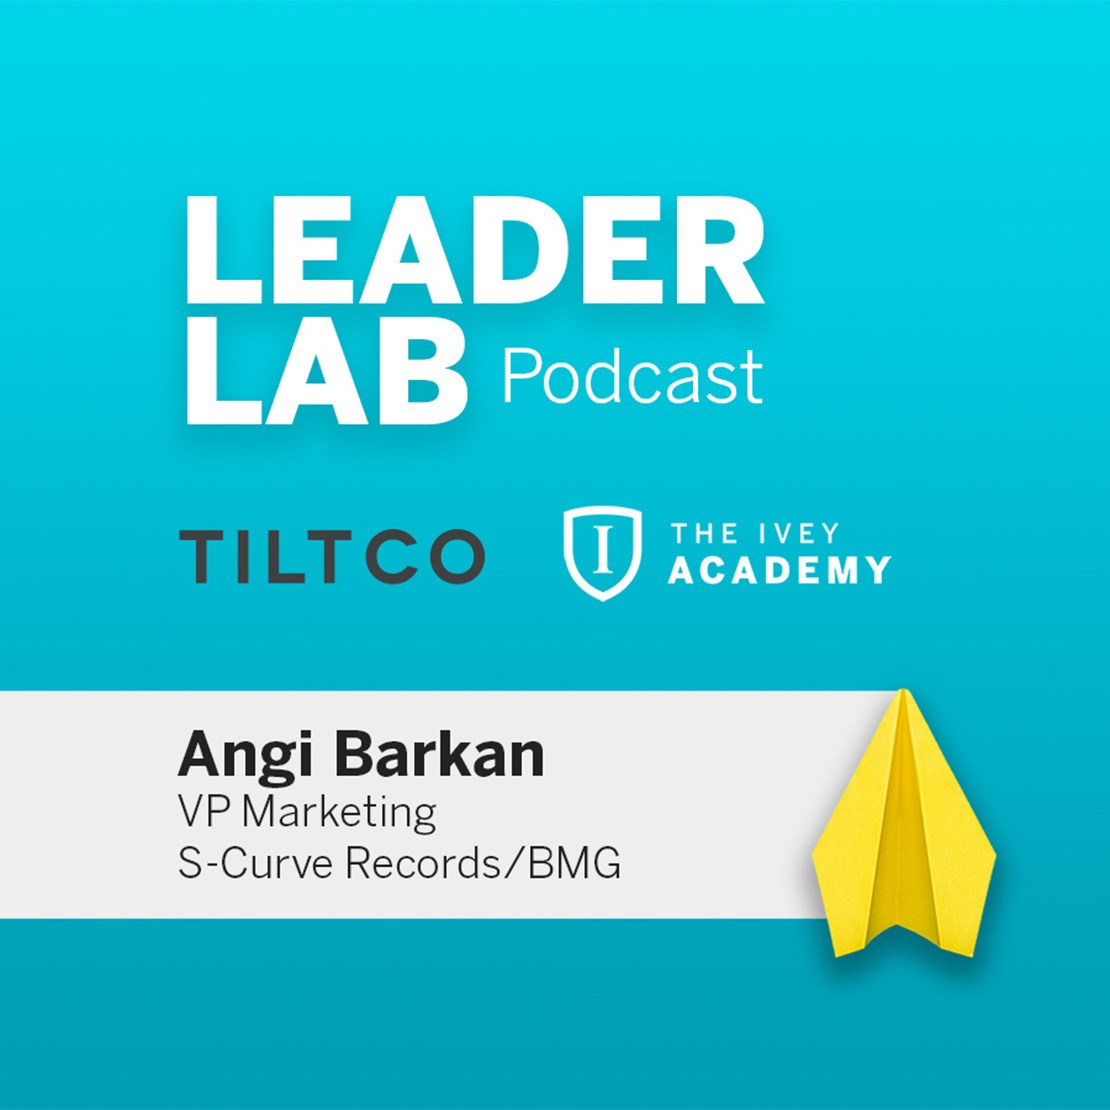 Leader Lab Episode Card: Angi Barkan of S-Curve Records